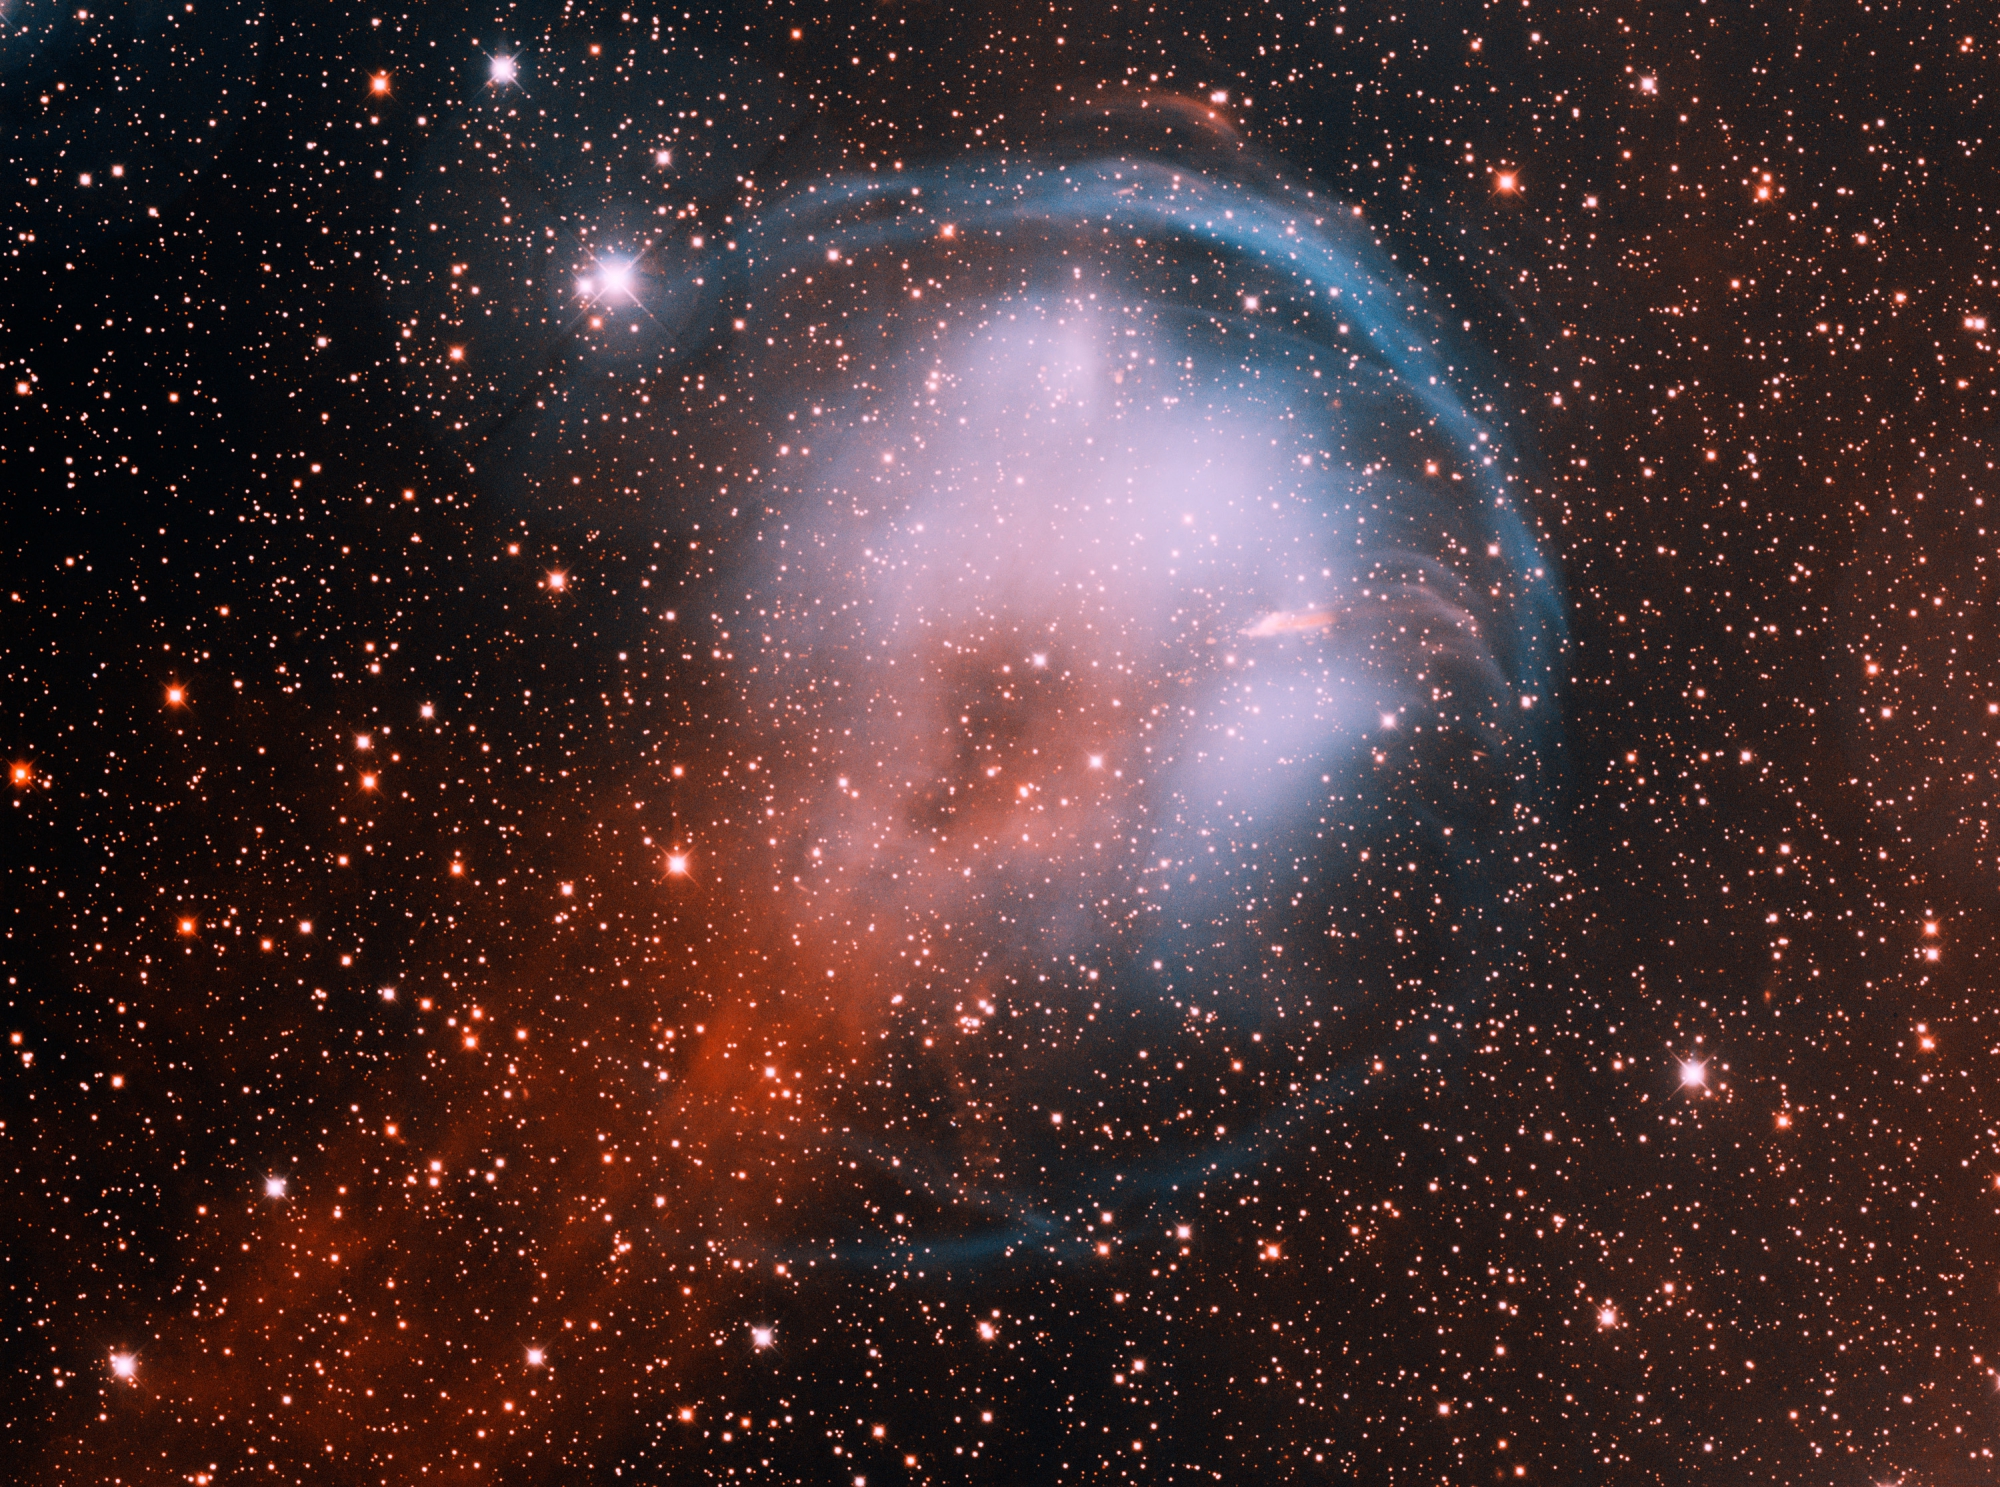 The system V664 Cassiopeia is creating a planetary nebula